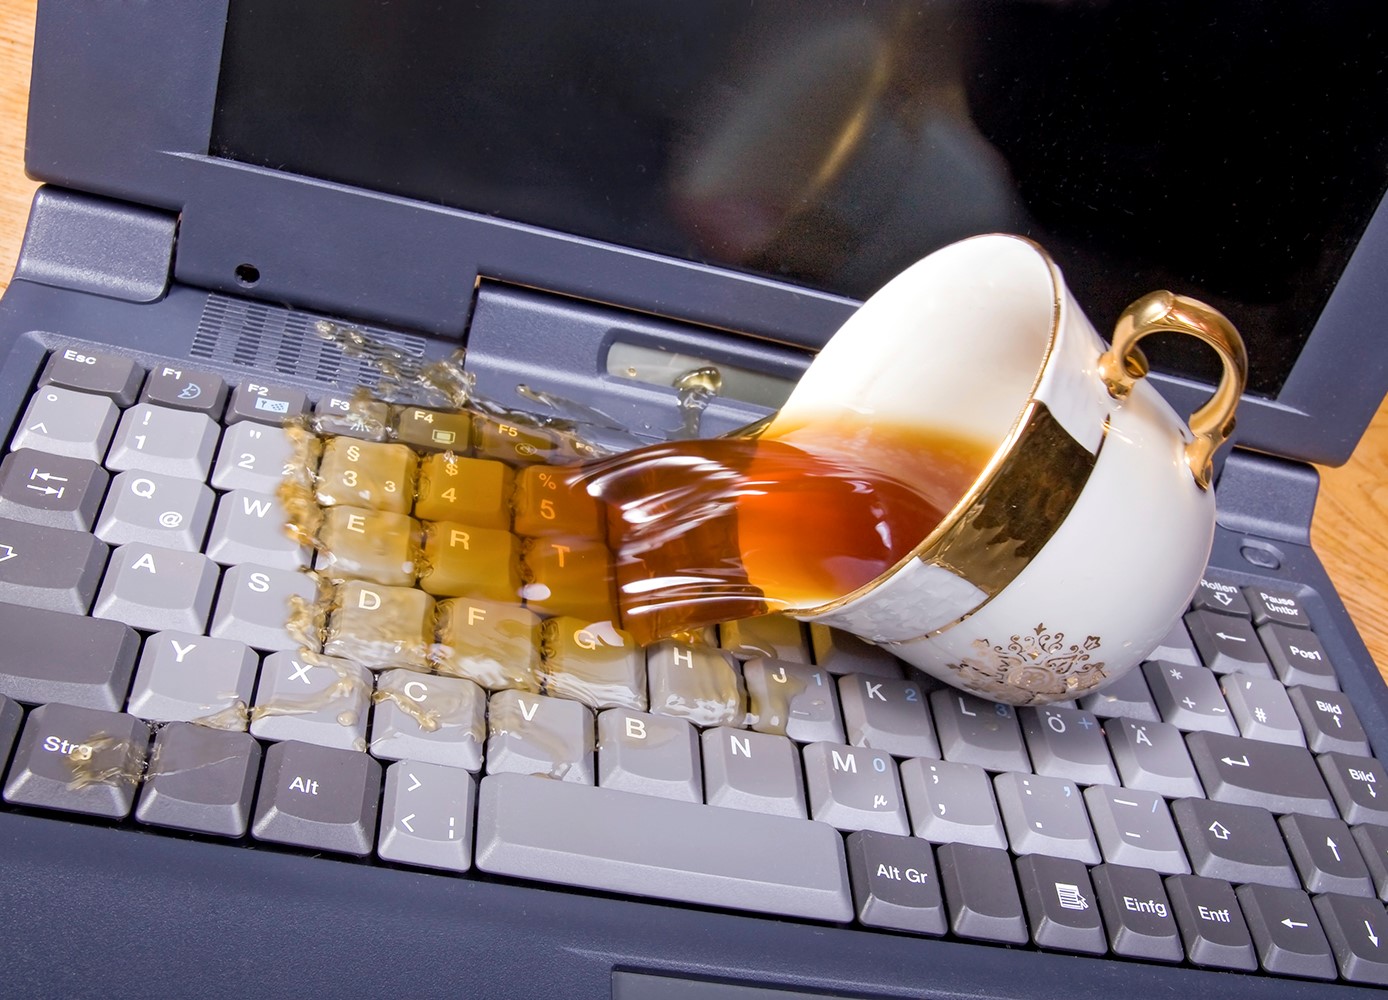 How To Save Your Laptop After A Spill